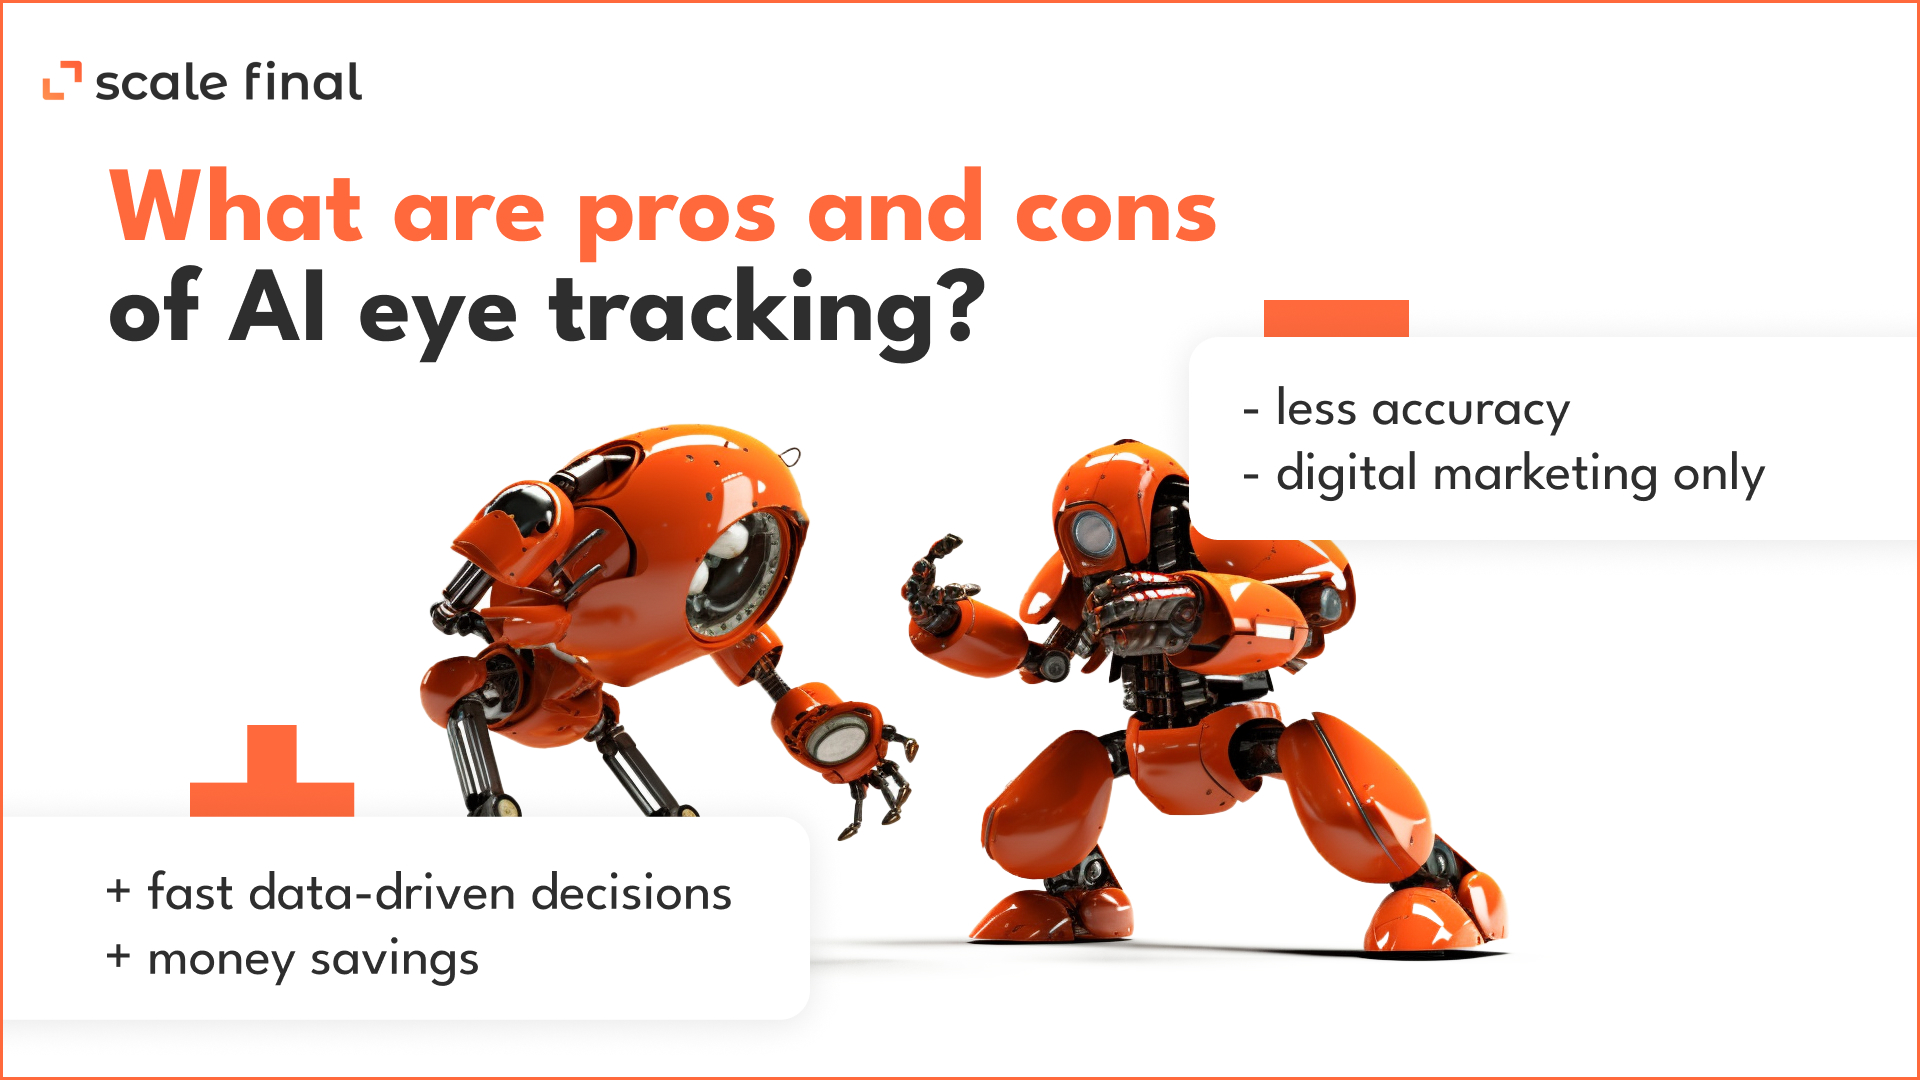 What are pros and cons of AI eye tracking?fast data-driven decisionsmoney savingsless accuracydigital marketing only